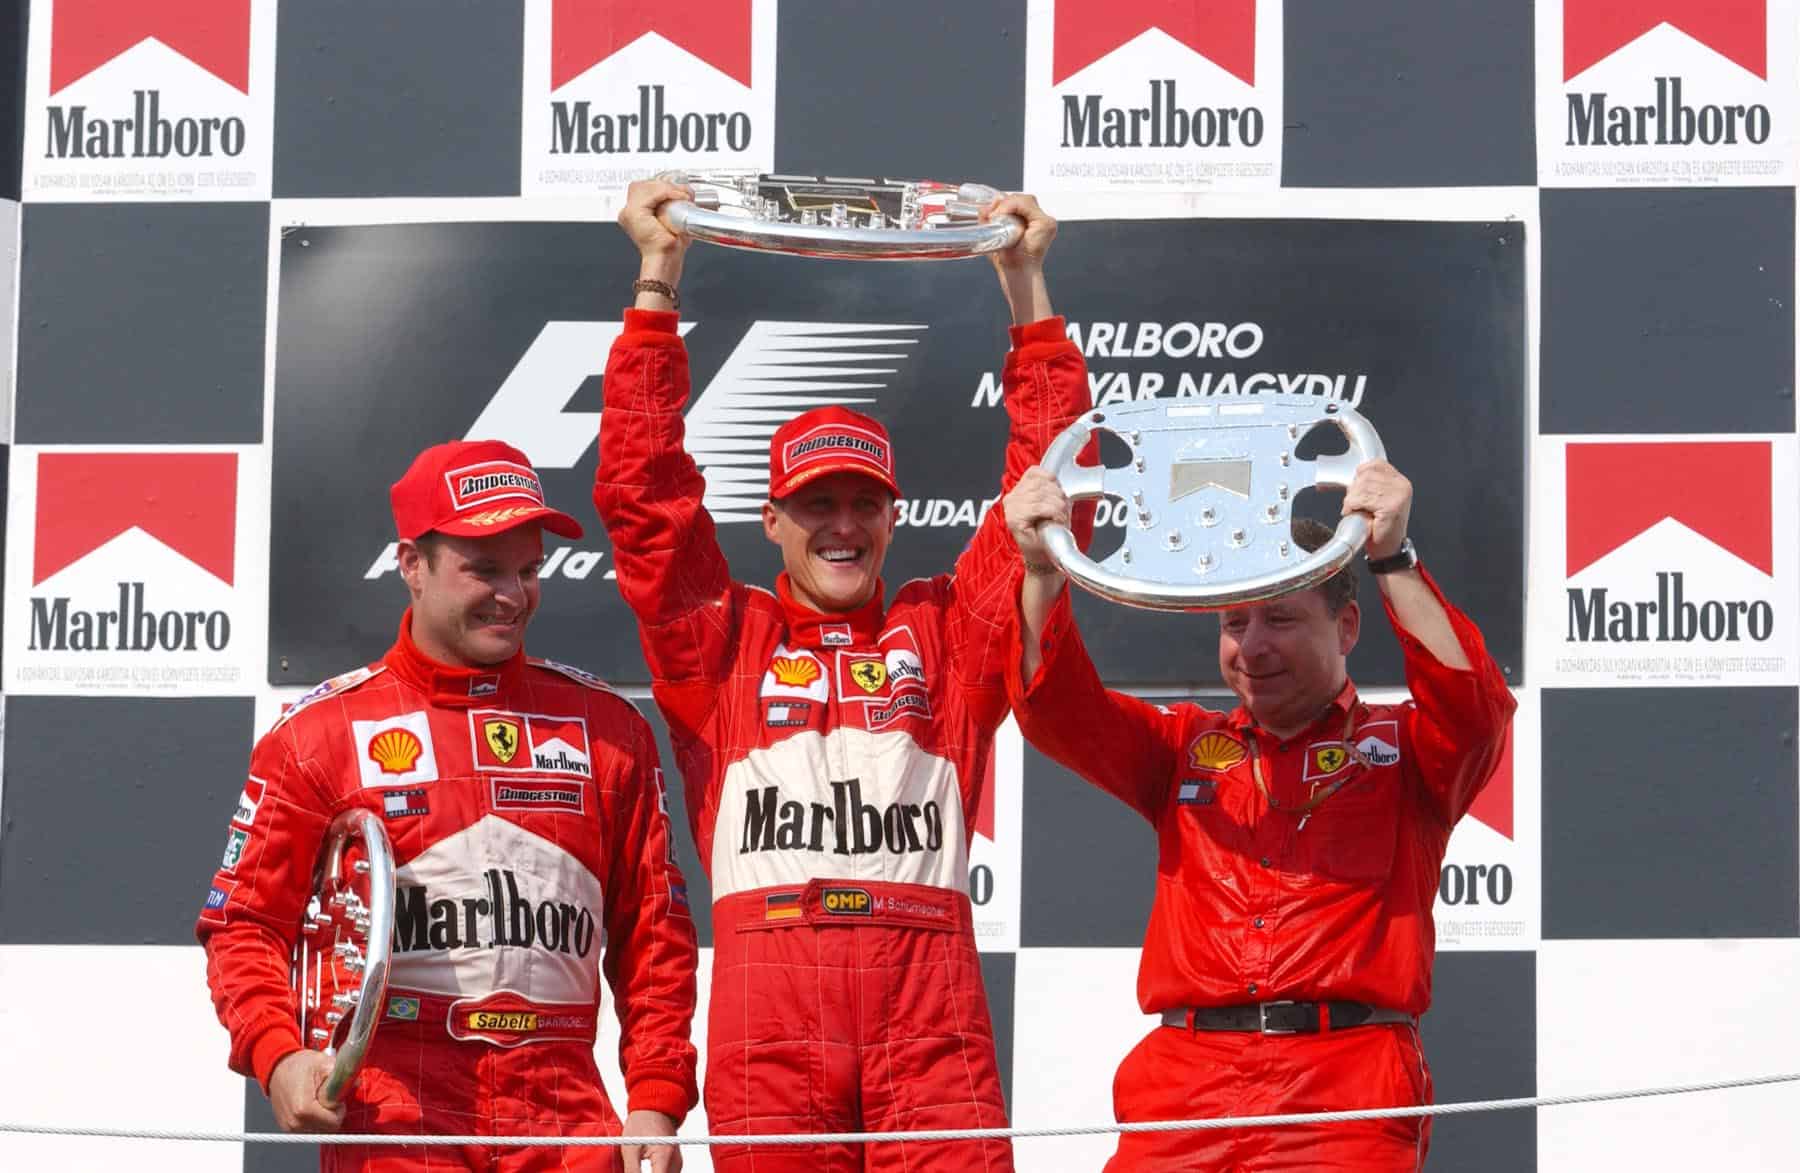 Rubens Barrichello explains why he couldn’t visit Michael Schumacher after skiing accident